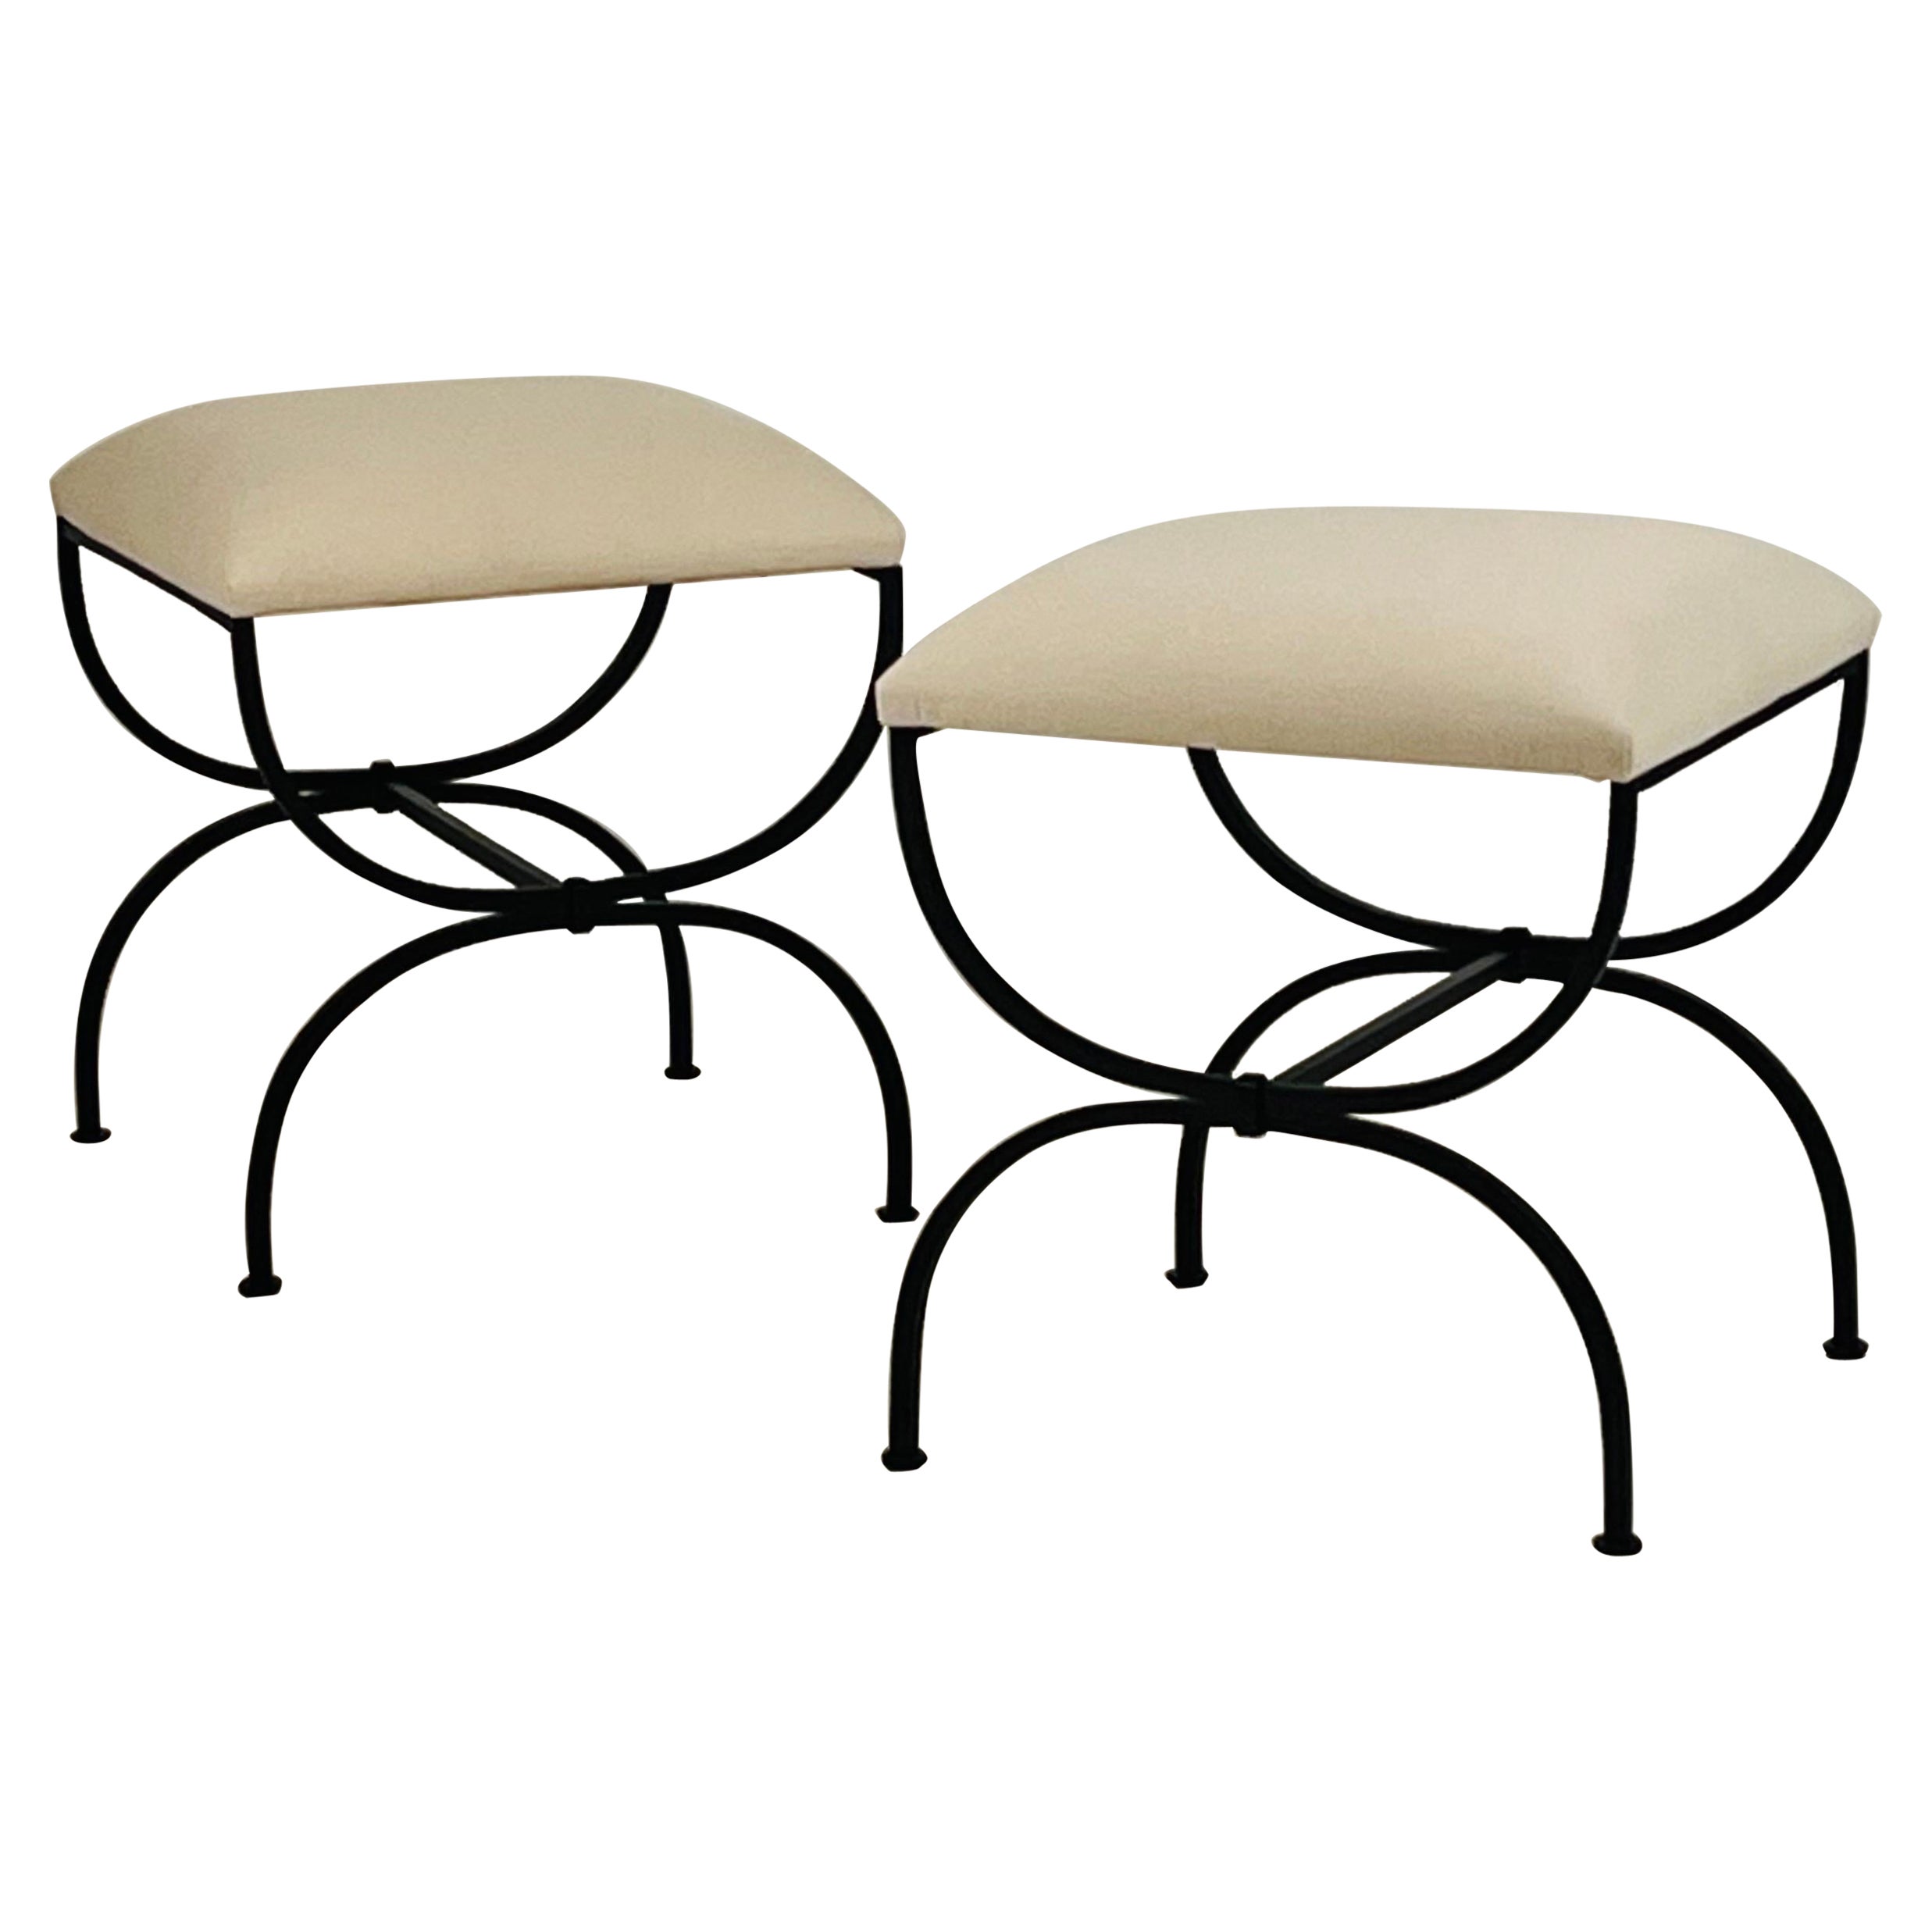 Pair of 'Strapontin' stools by Design Frères in muslin or COM For Sale